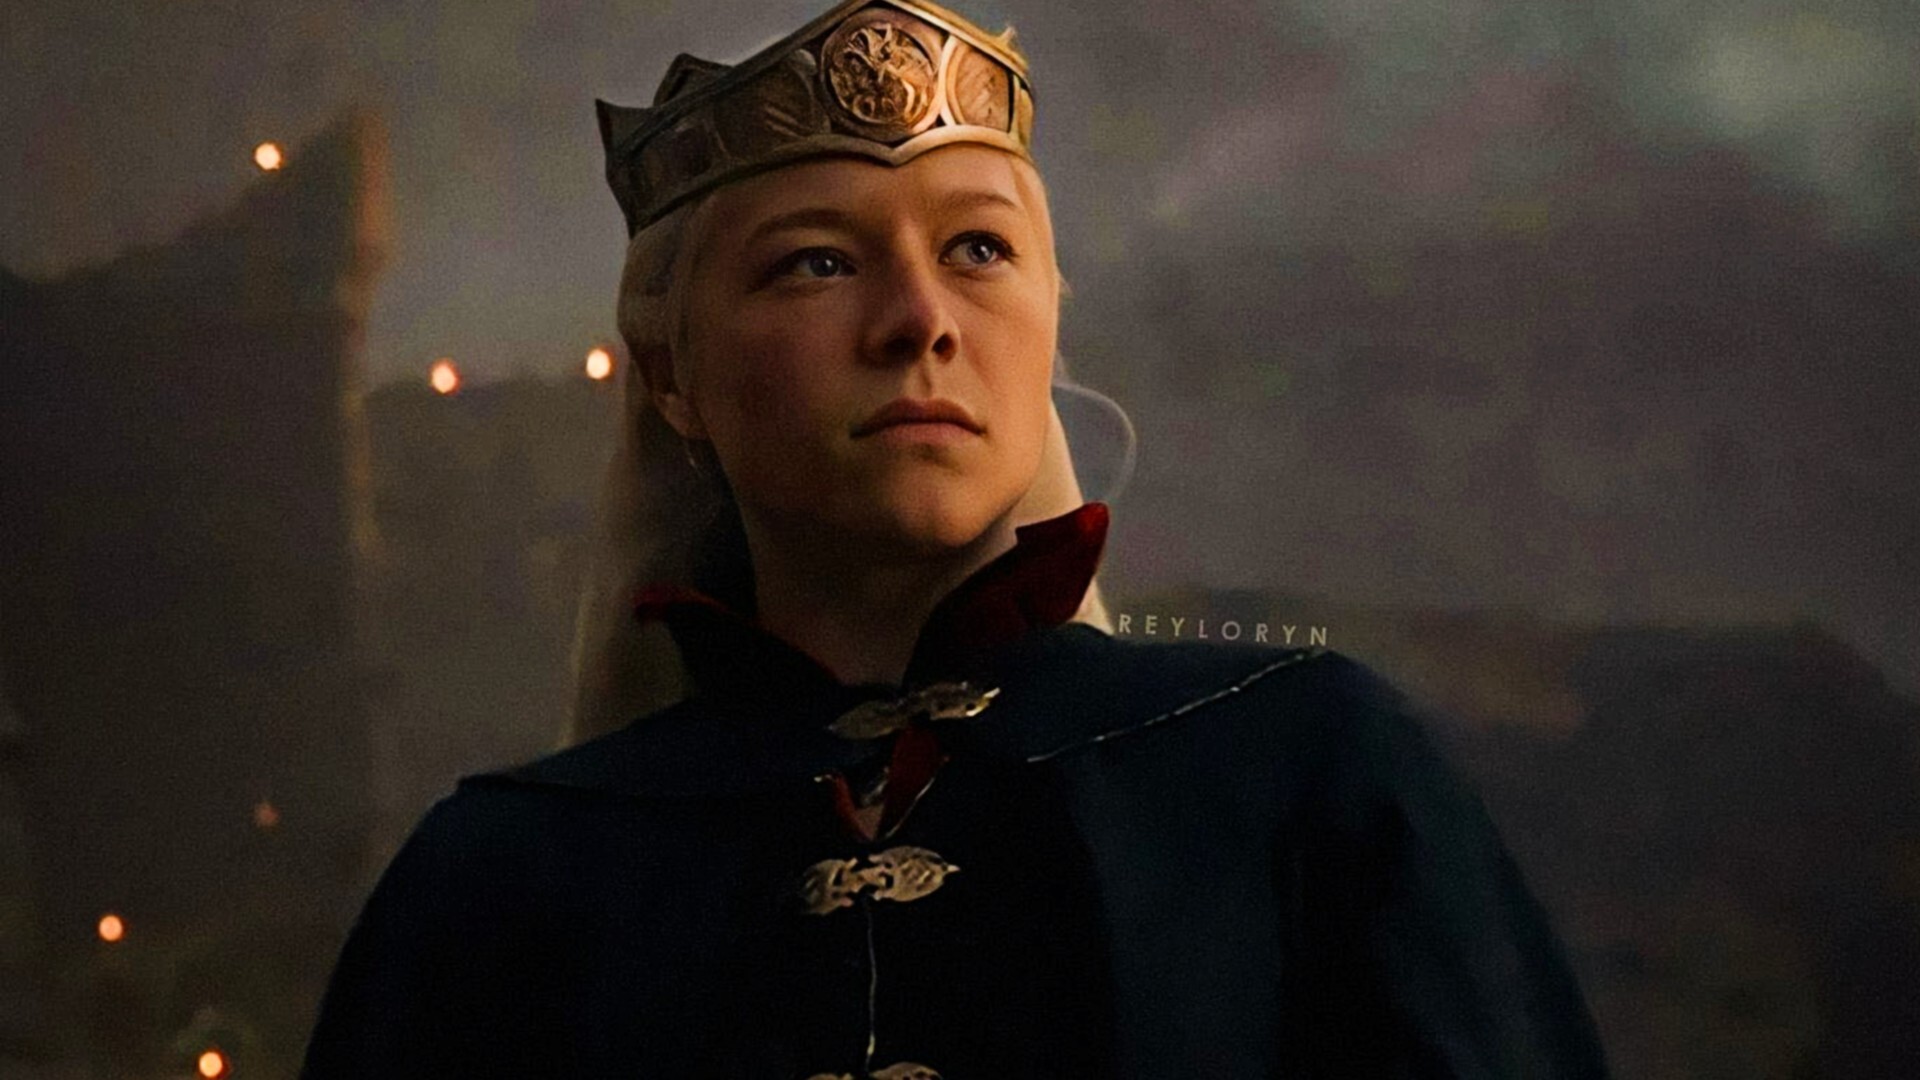 House Of The Dragon Episode 1 Review: Rhaenyra Rises To Power, Dragons Fly  Higher; Not An Attempt To Overpower But A Love Letter To Game Of Thrones